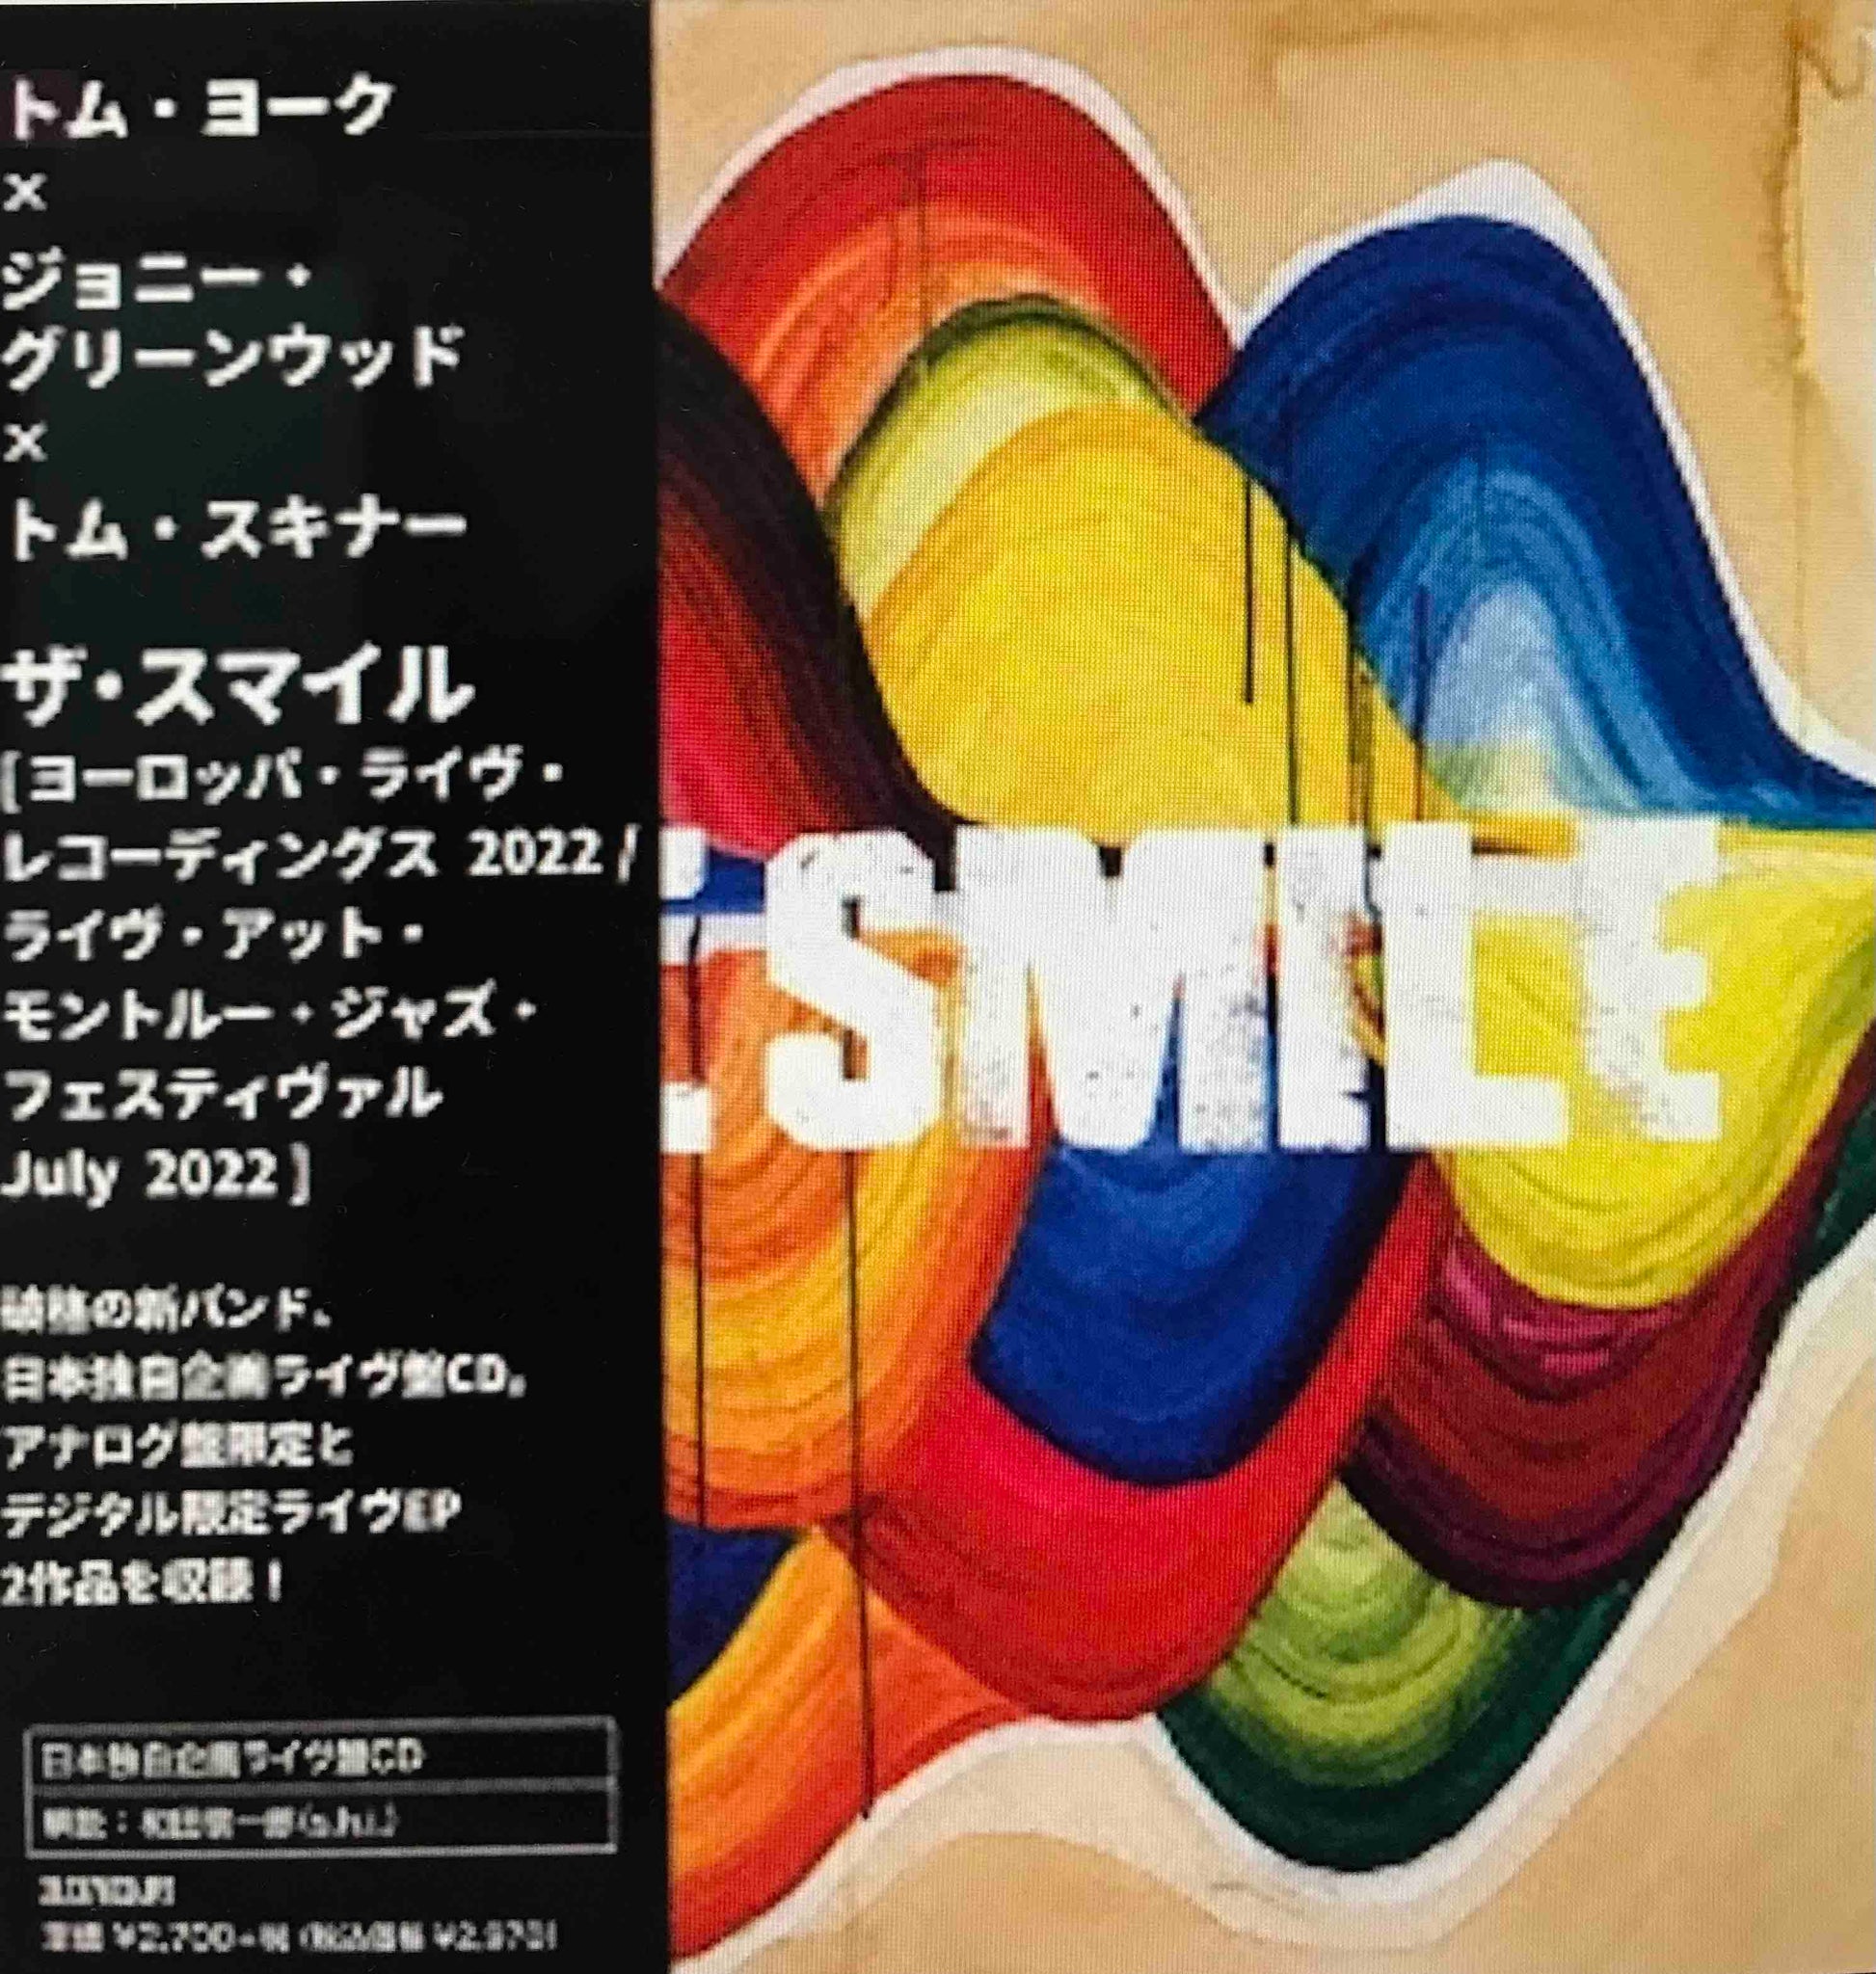 THE SMILE - Europe Live Recordings2022 / Live at Montreux JazzFestival, July 2022